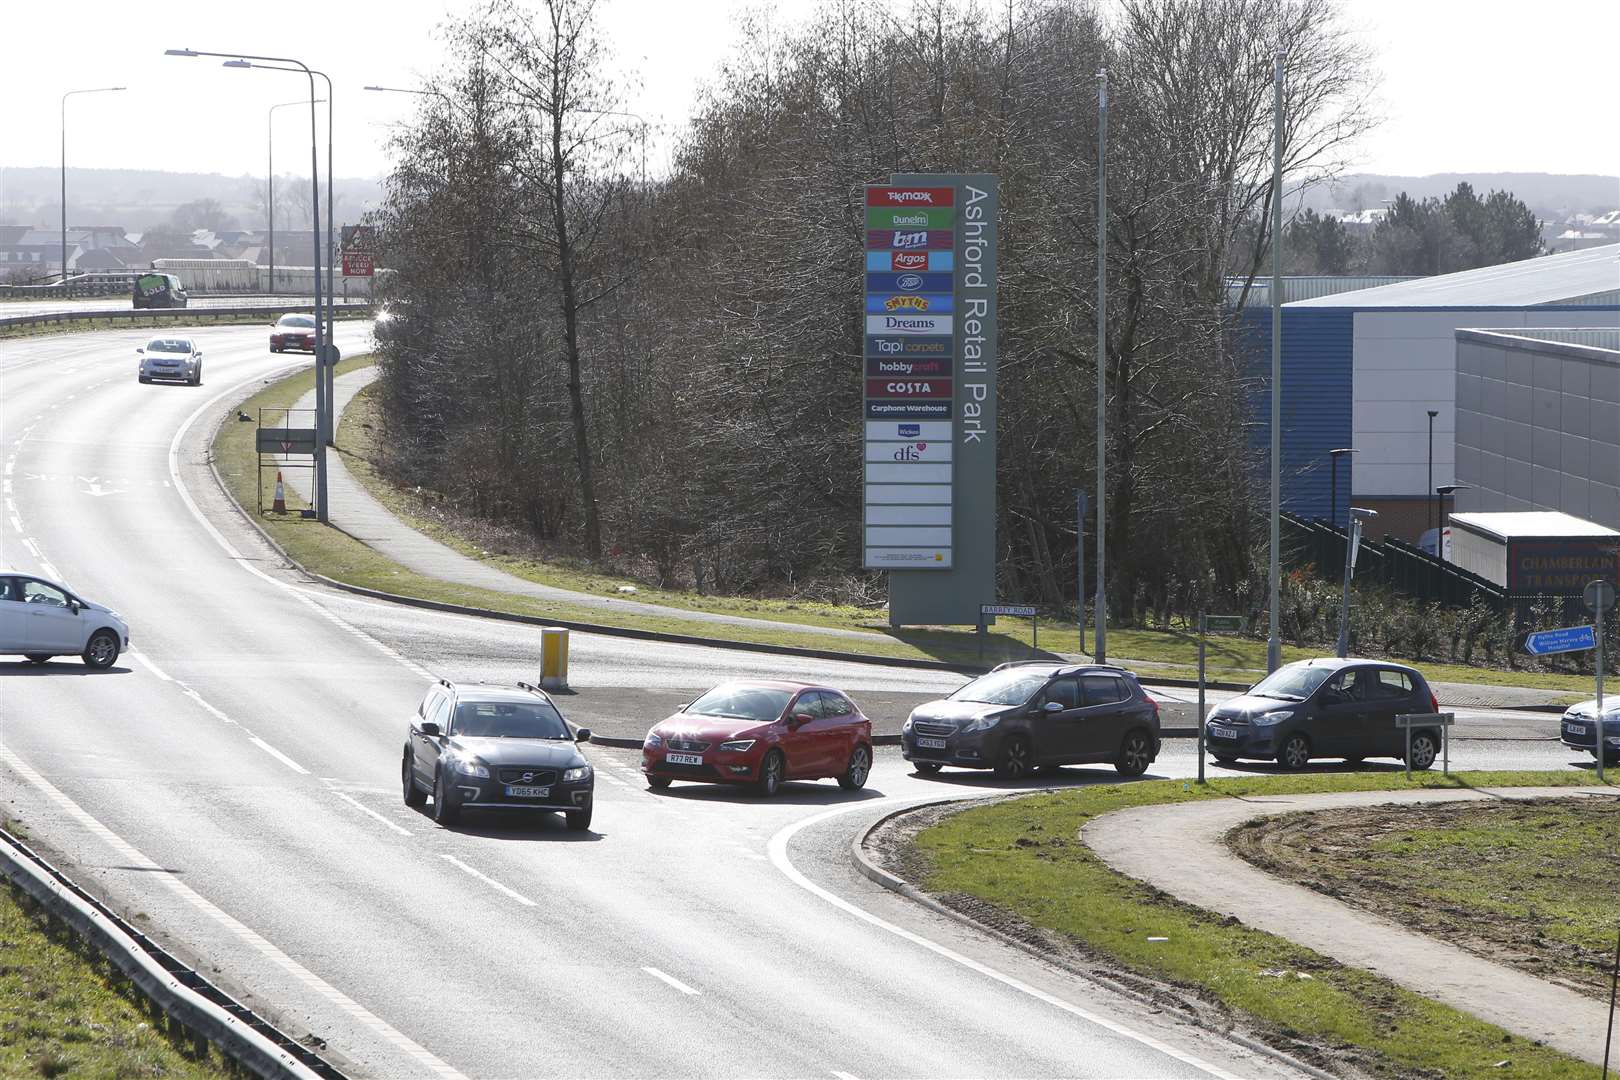 Drivers will face delays on the A2070 until late next year